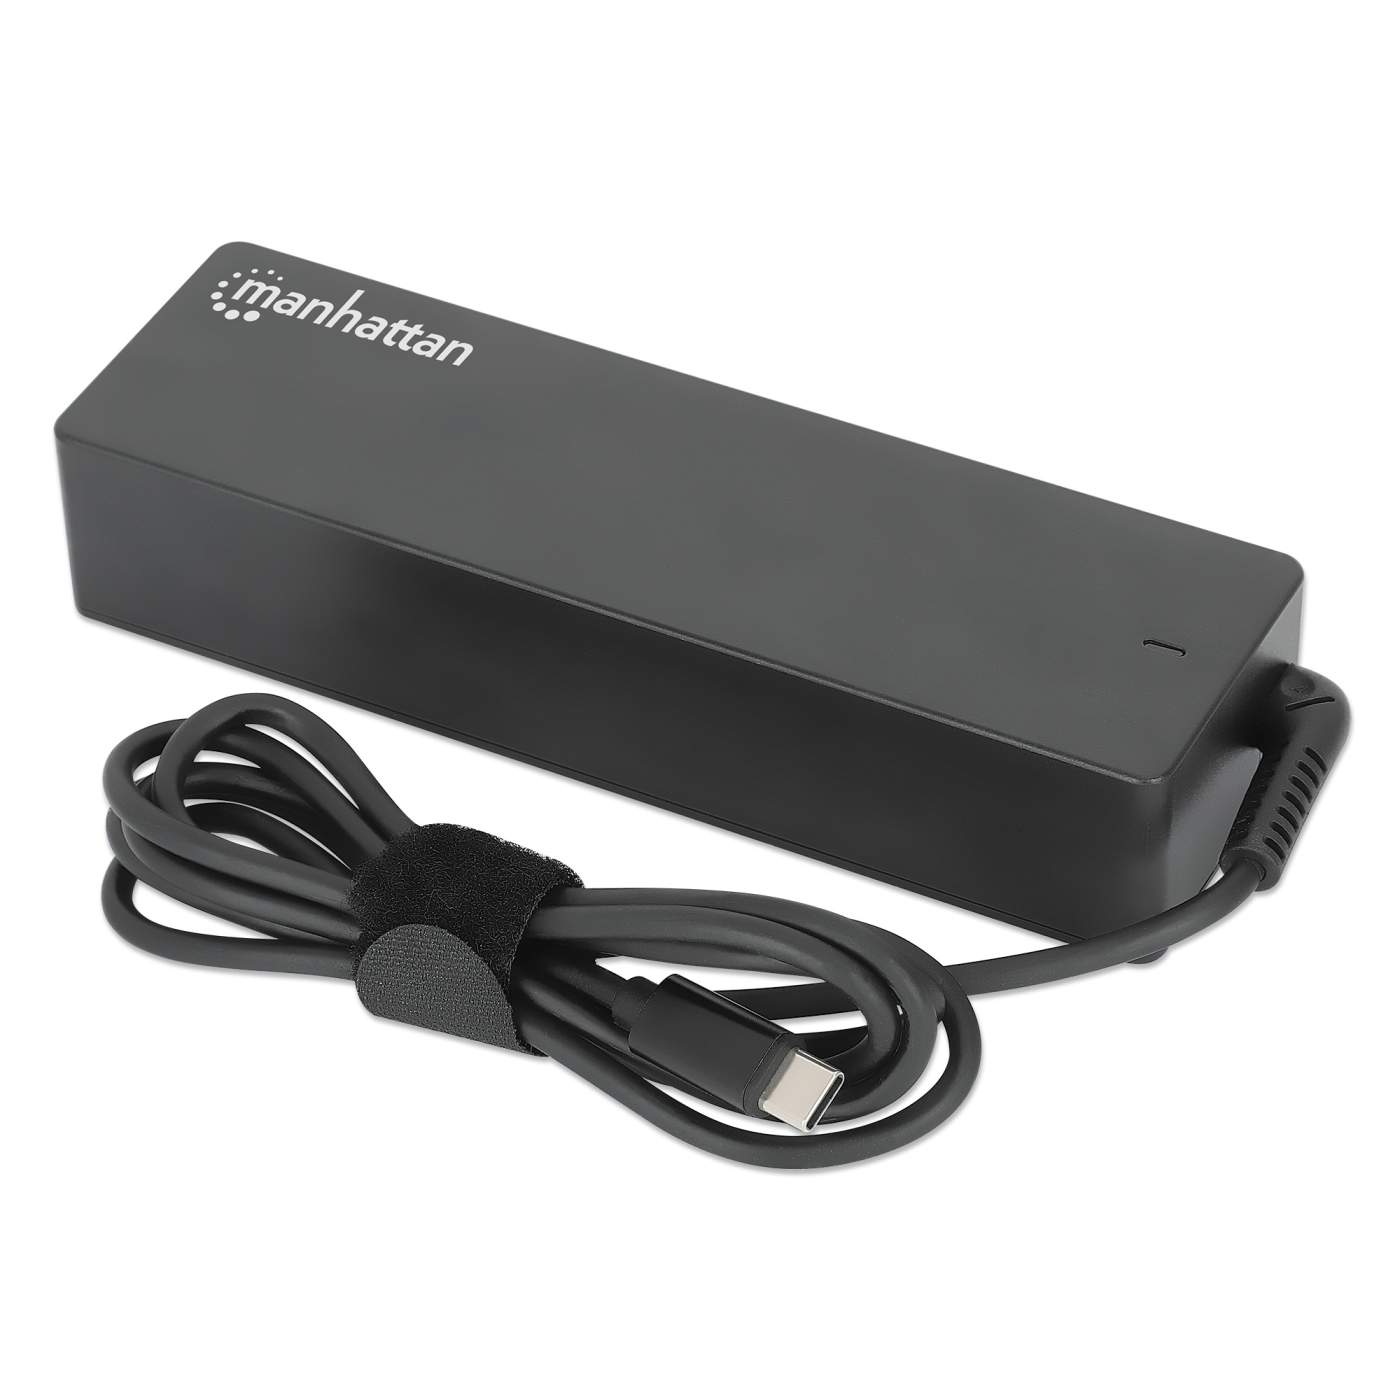 USB-C Power Delivery Laptop Charger - 100 W Image 1